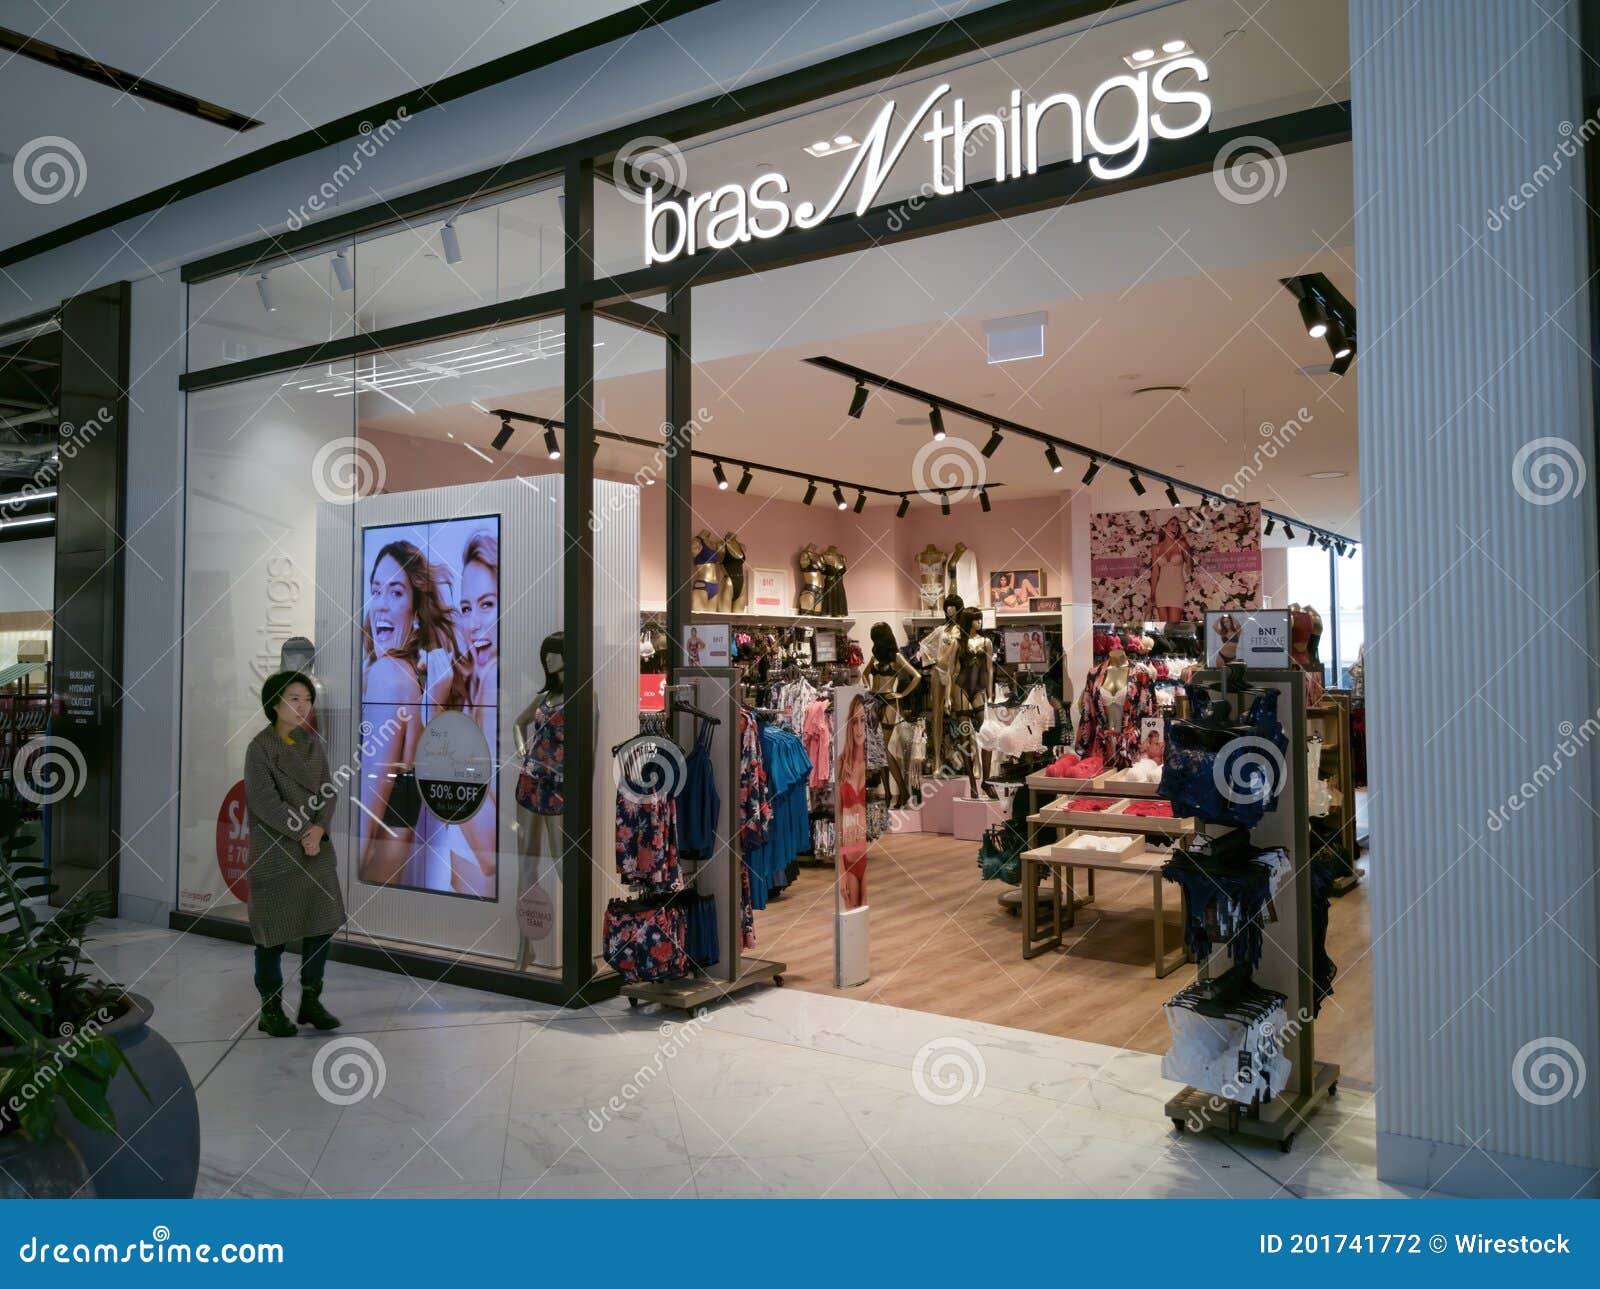 https://thumbs.dreamstime.com/z/view-bras-n-things-store-westfield-newmarket-shopping-centre-mall-bras-n-things-store-westfield-newmarket-shopping-centre-201741772.jpg